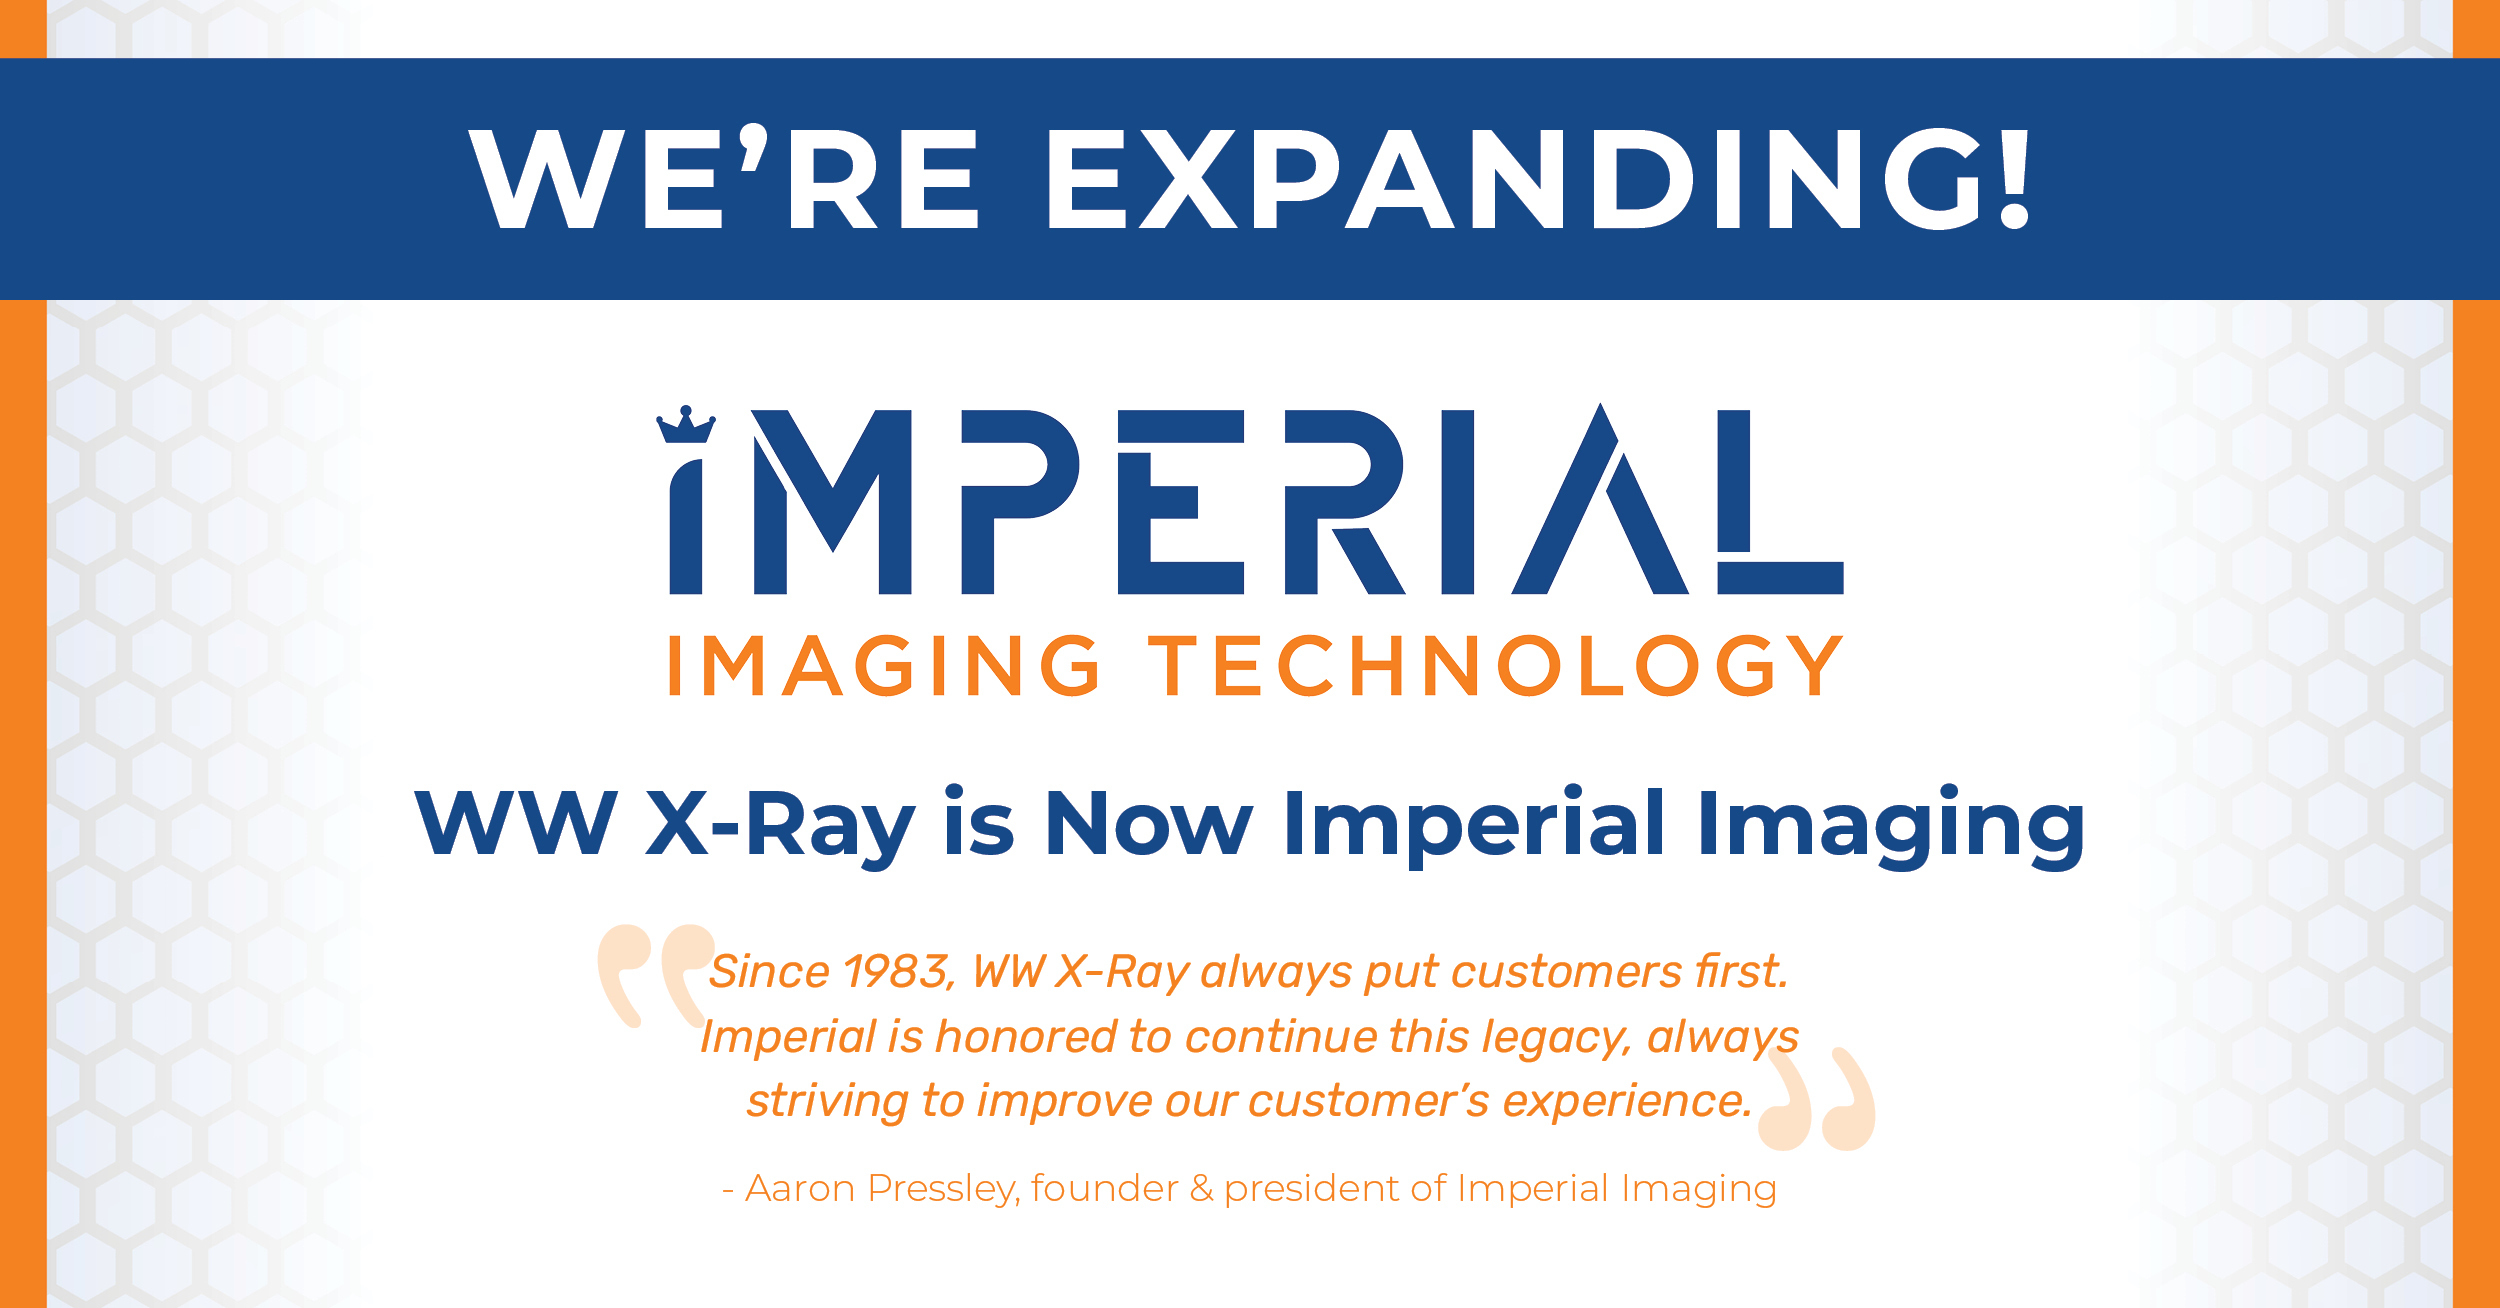 Imperial Imaging Technology Fuels Growth with the Acquisition of WW X-Ray Co.